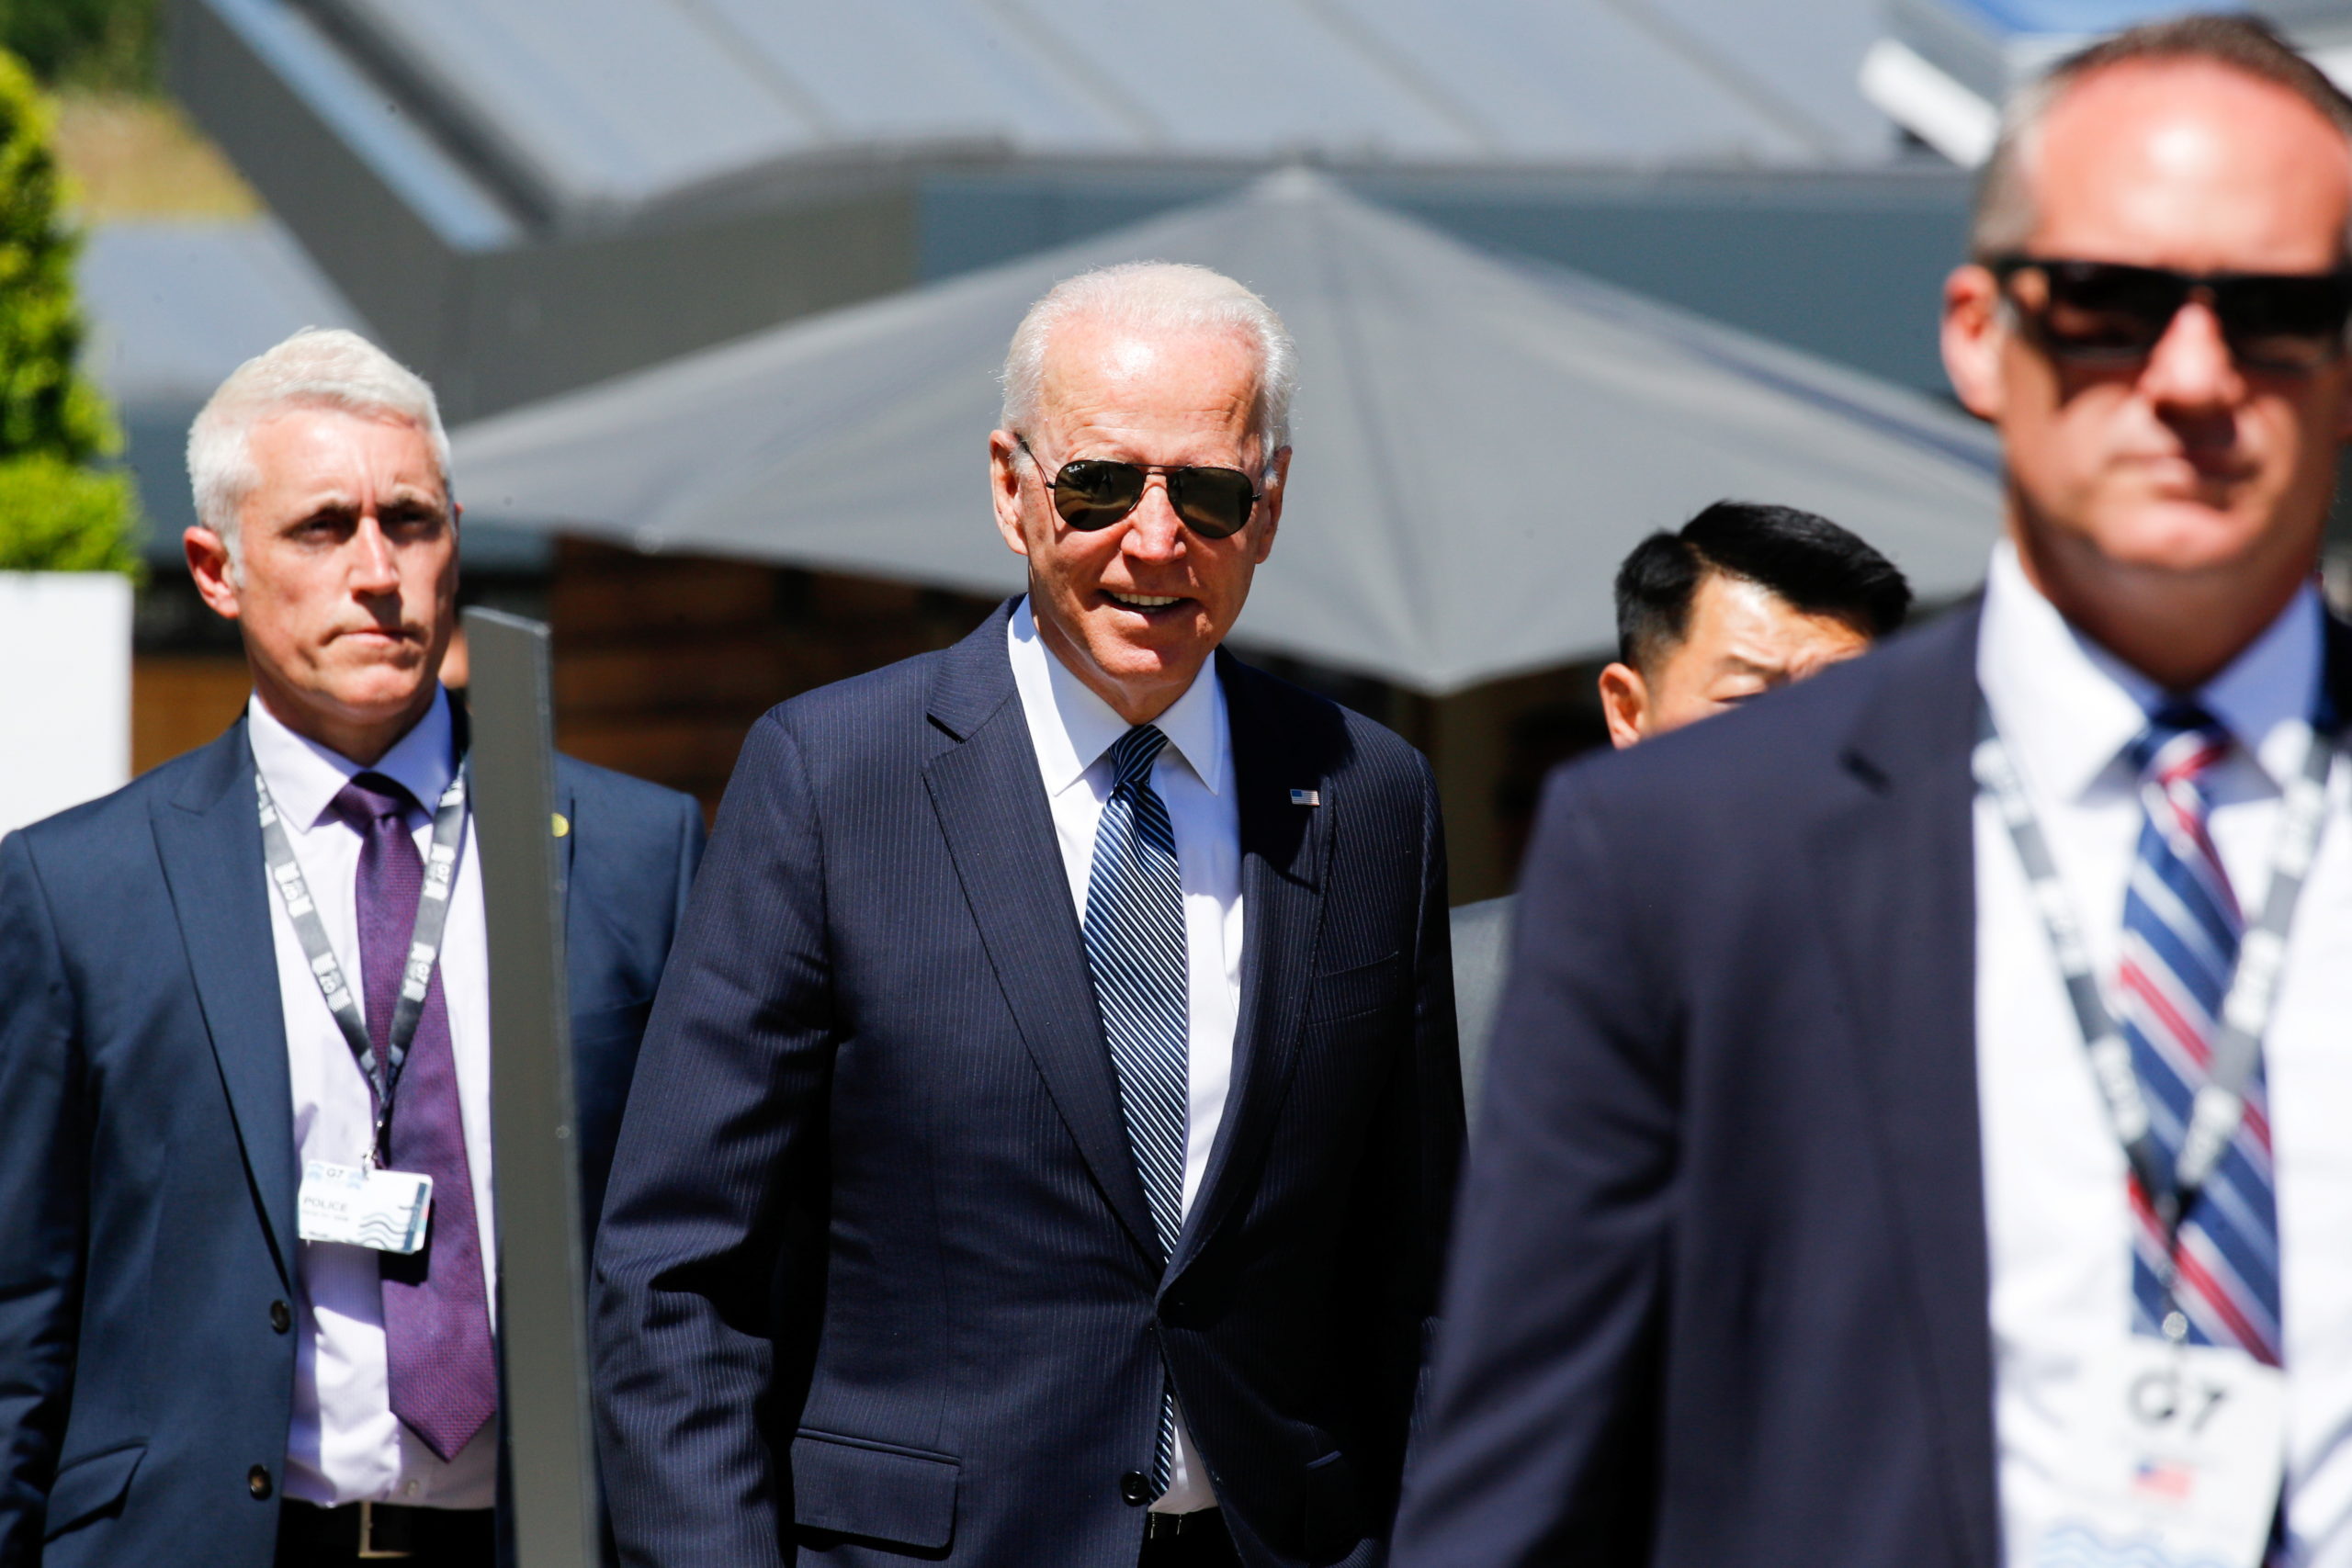 U.S. President Joe Biden arrives for a plenary session during G7 summit in Carbis Bay on June 13, 2021 in Cornwall, United Kingdom. (Phil Noble - WPA Pool/Getty Images)